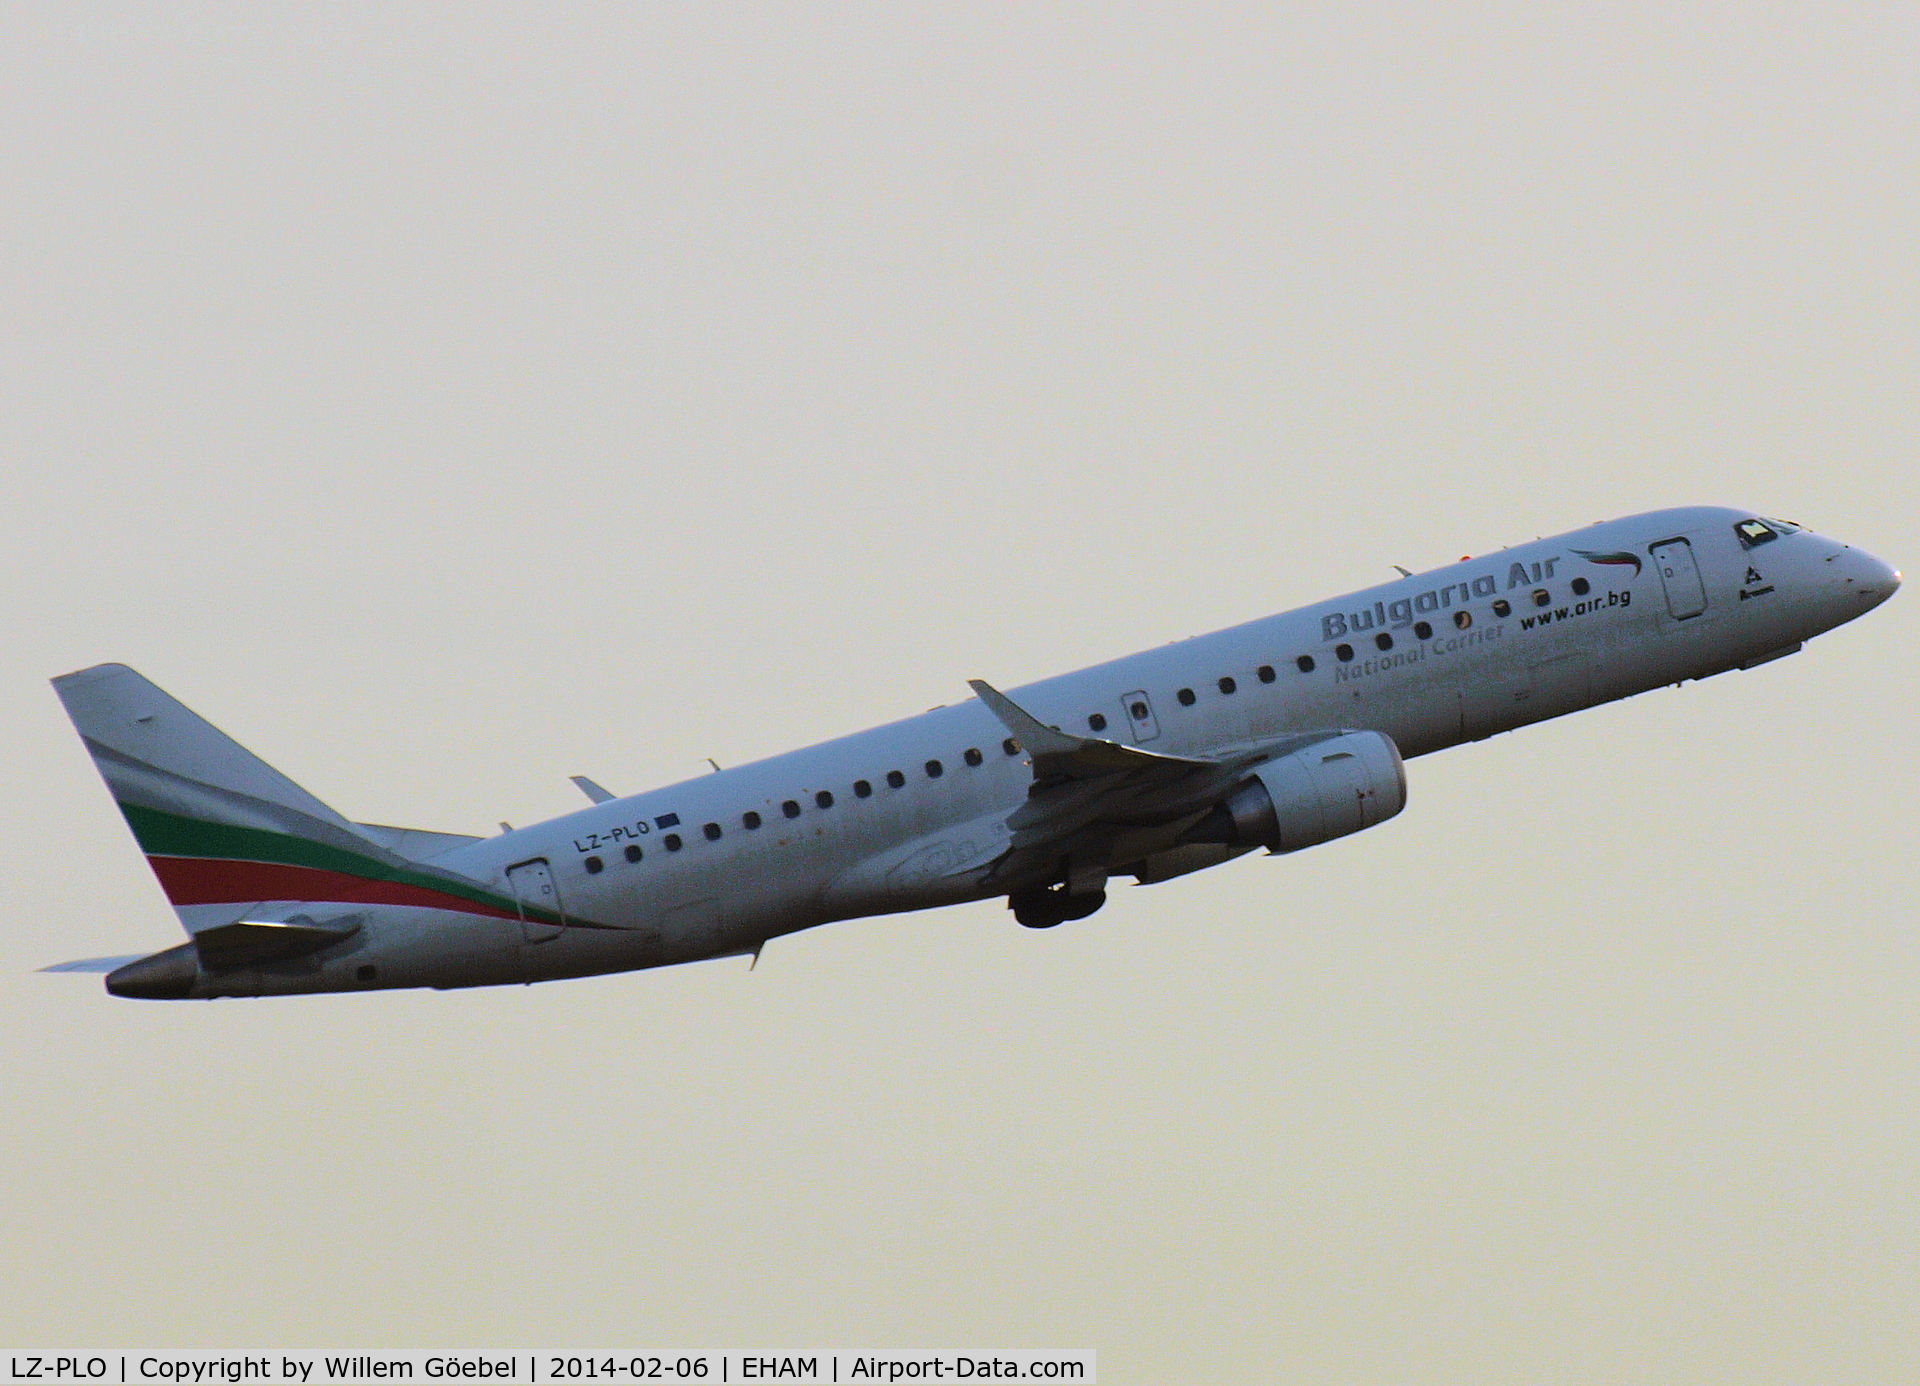 LZ-PLO, 2012 Embraer 190AR (ERJ-190-100IGW) C/N 19000584, Tak off from runway 18L of Schiphol Airport